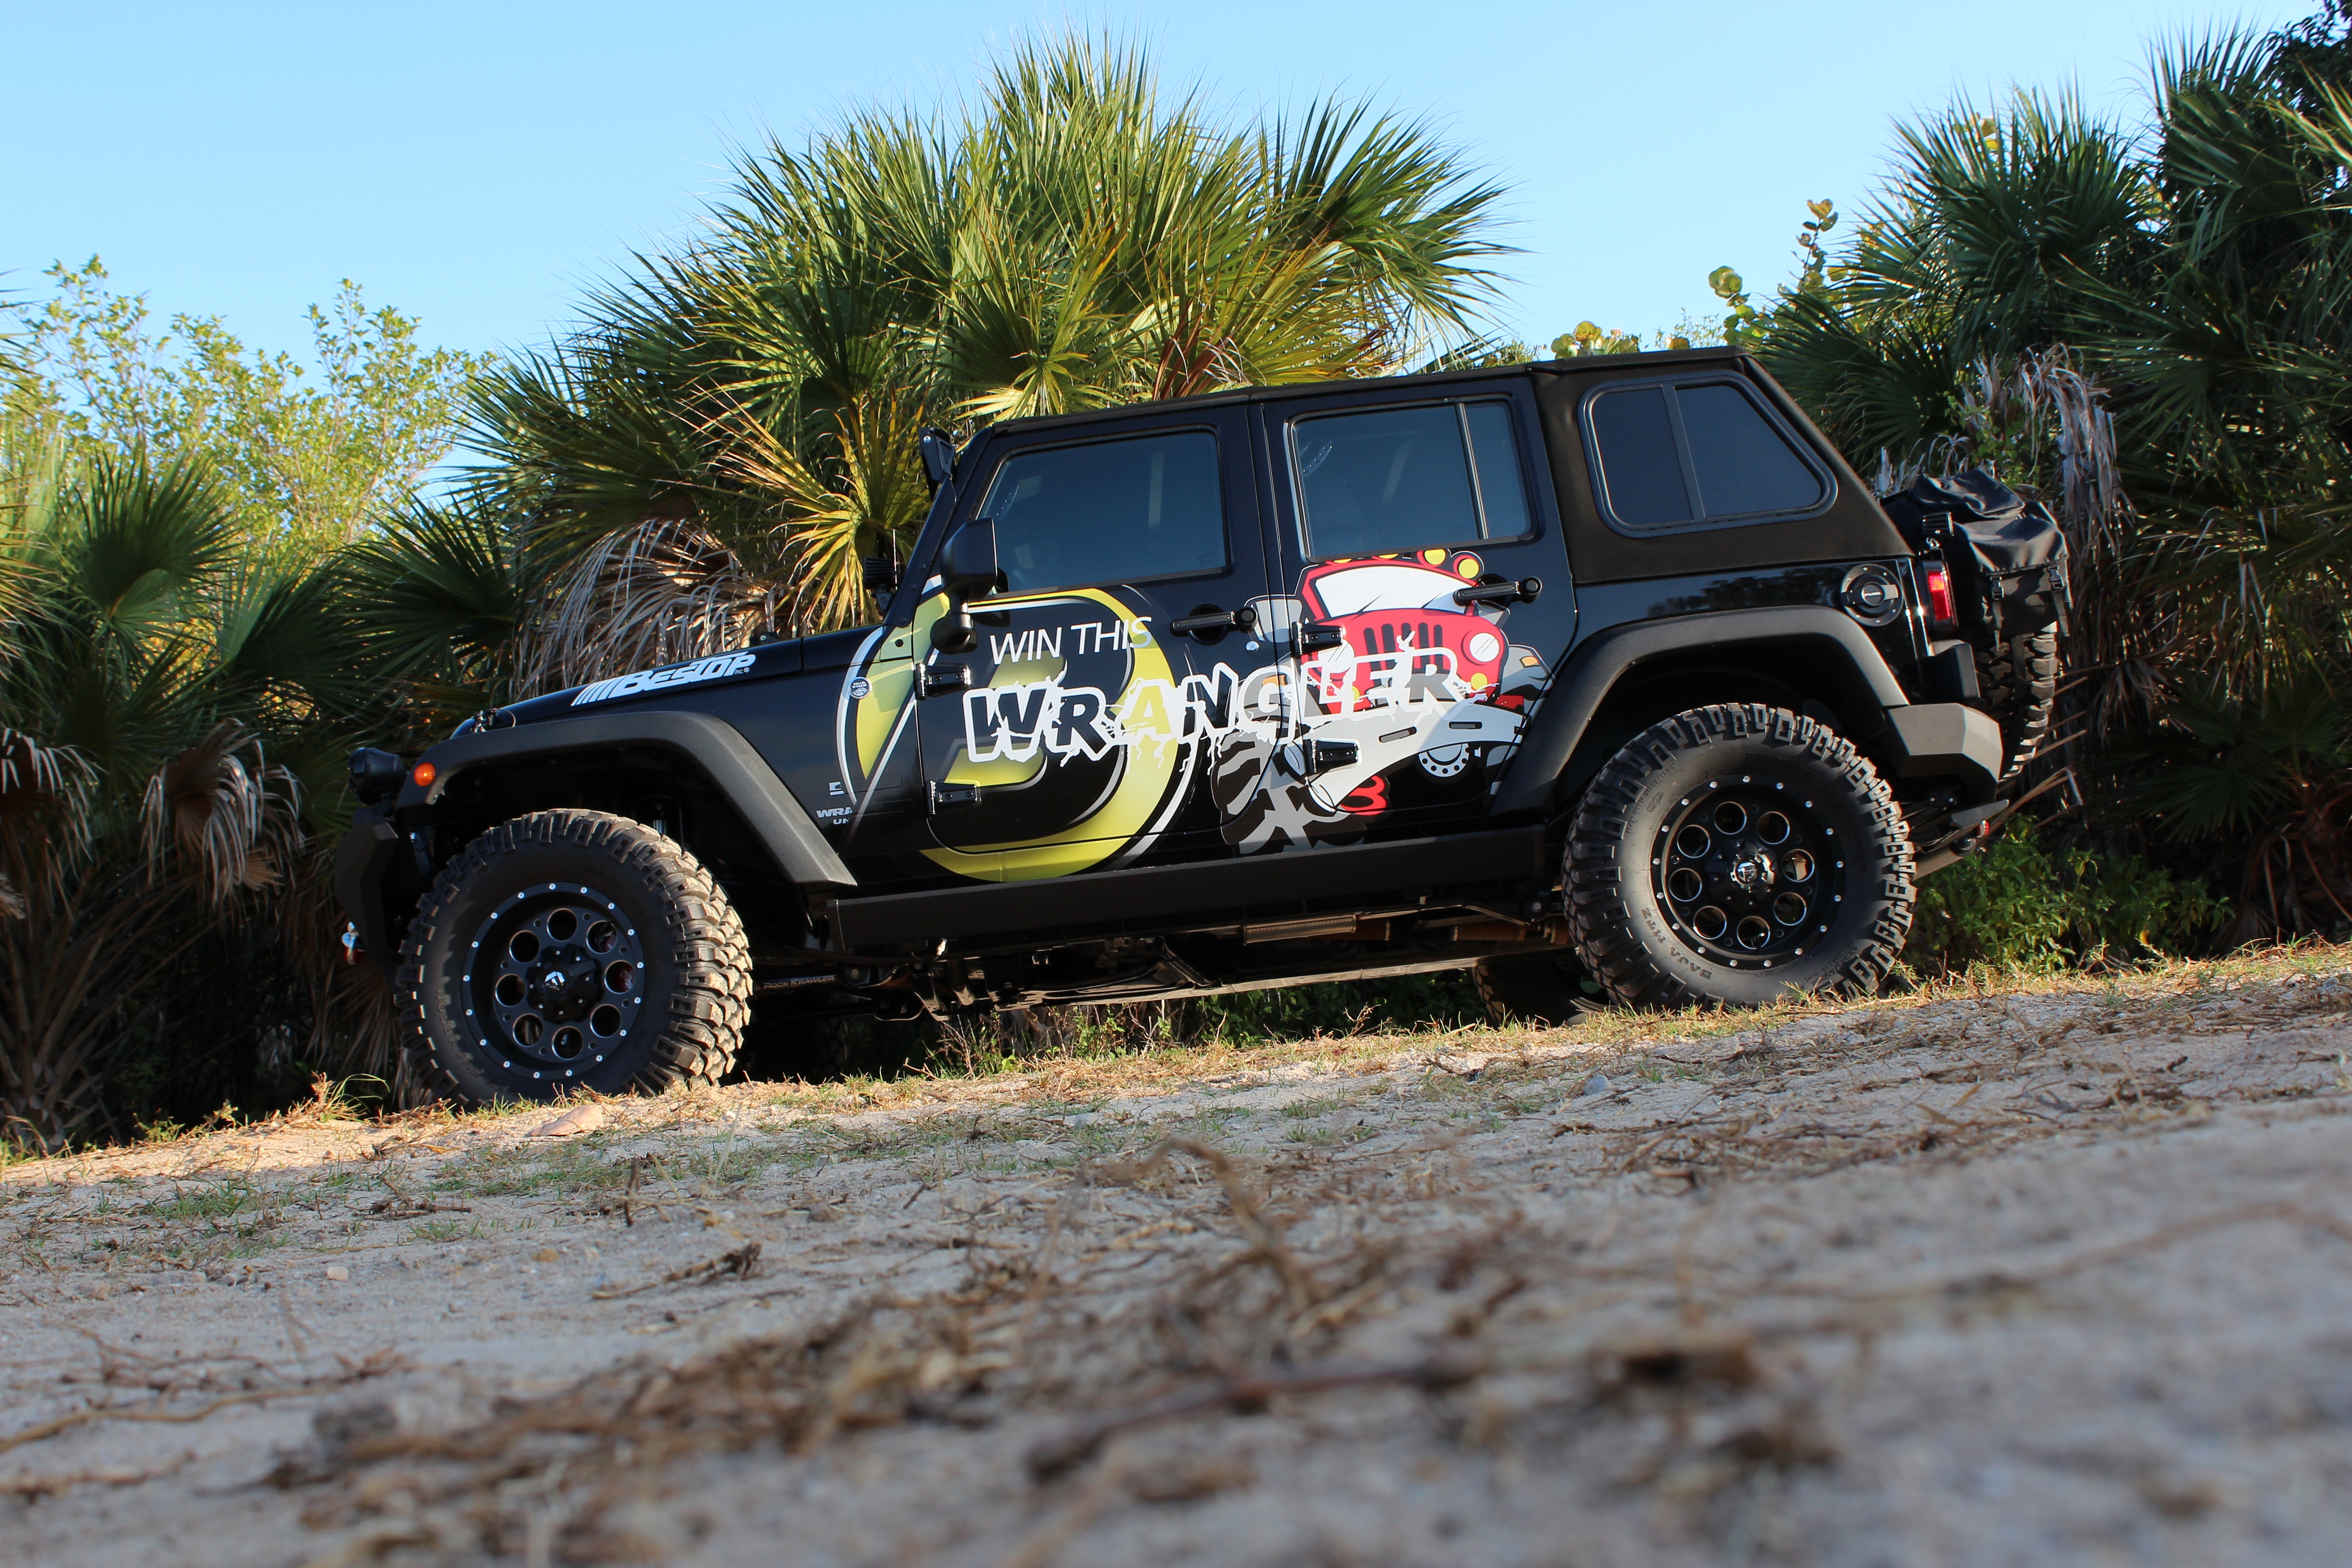 win this jeep !